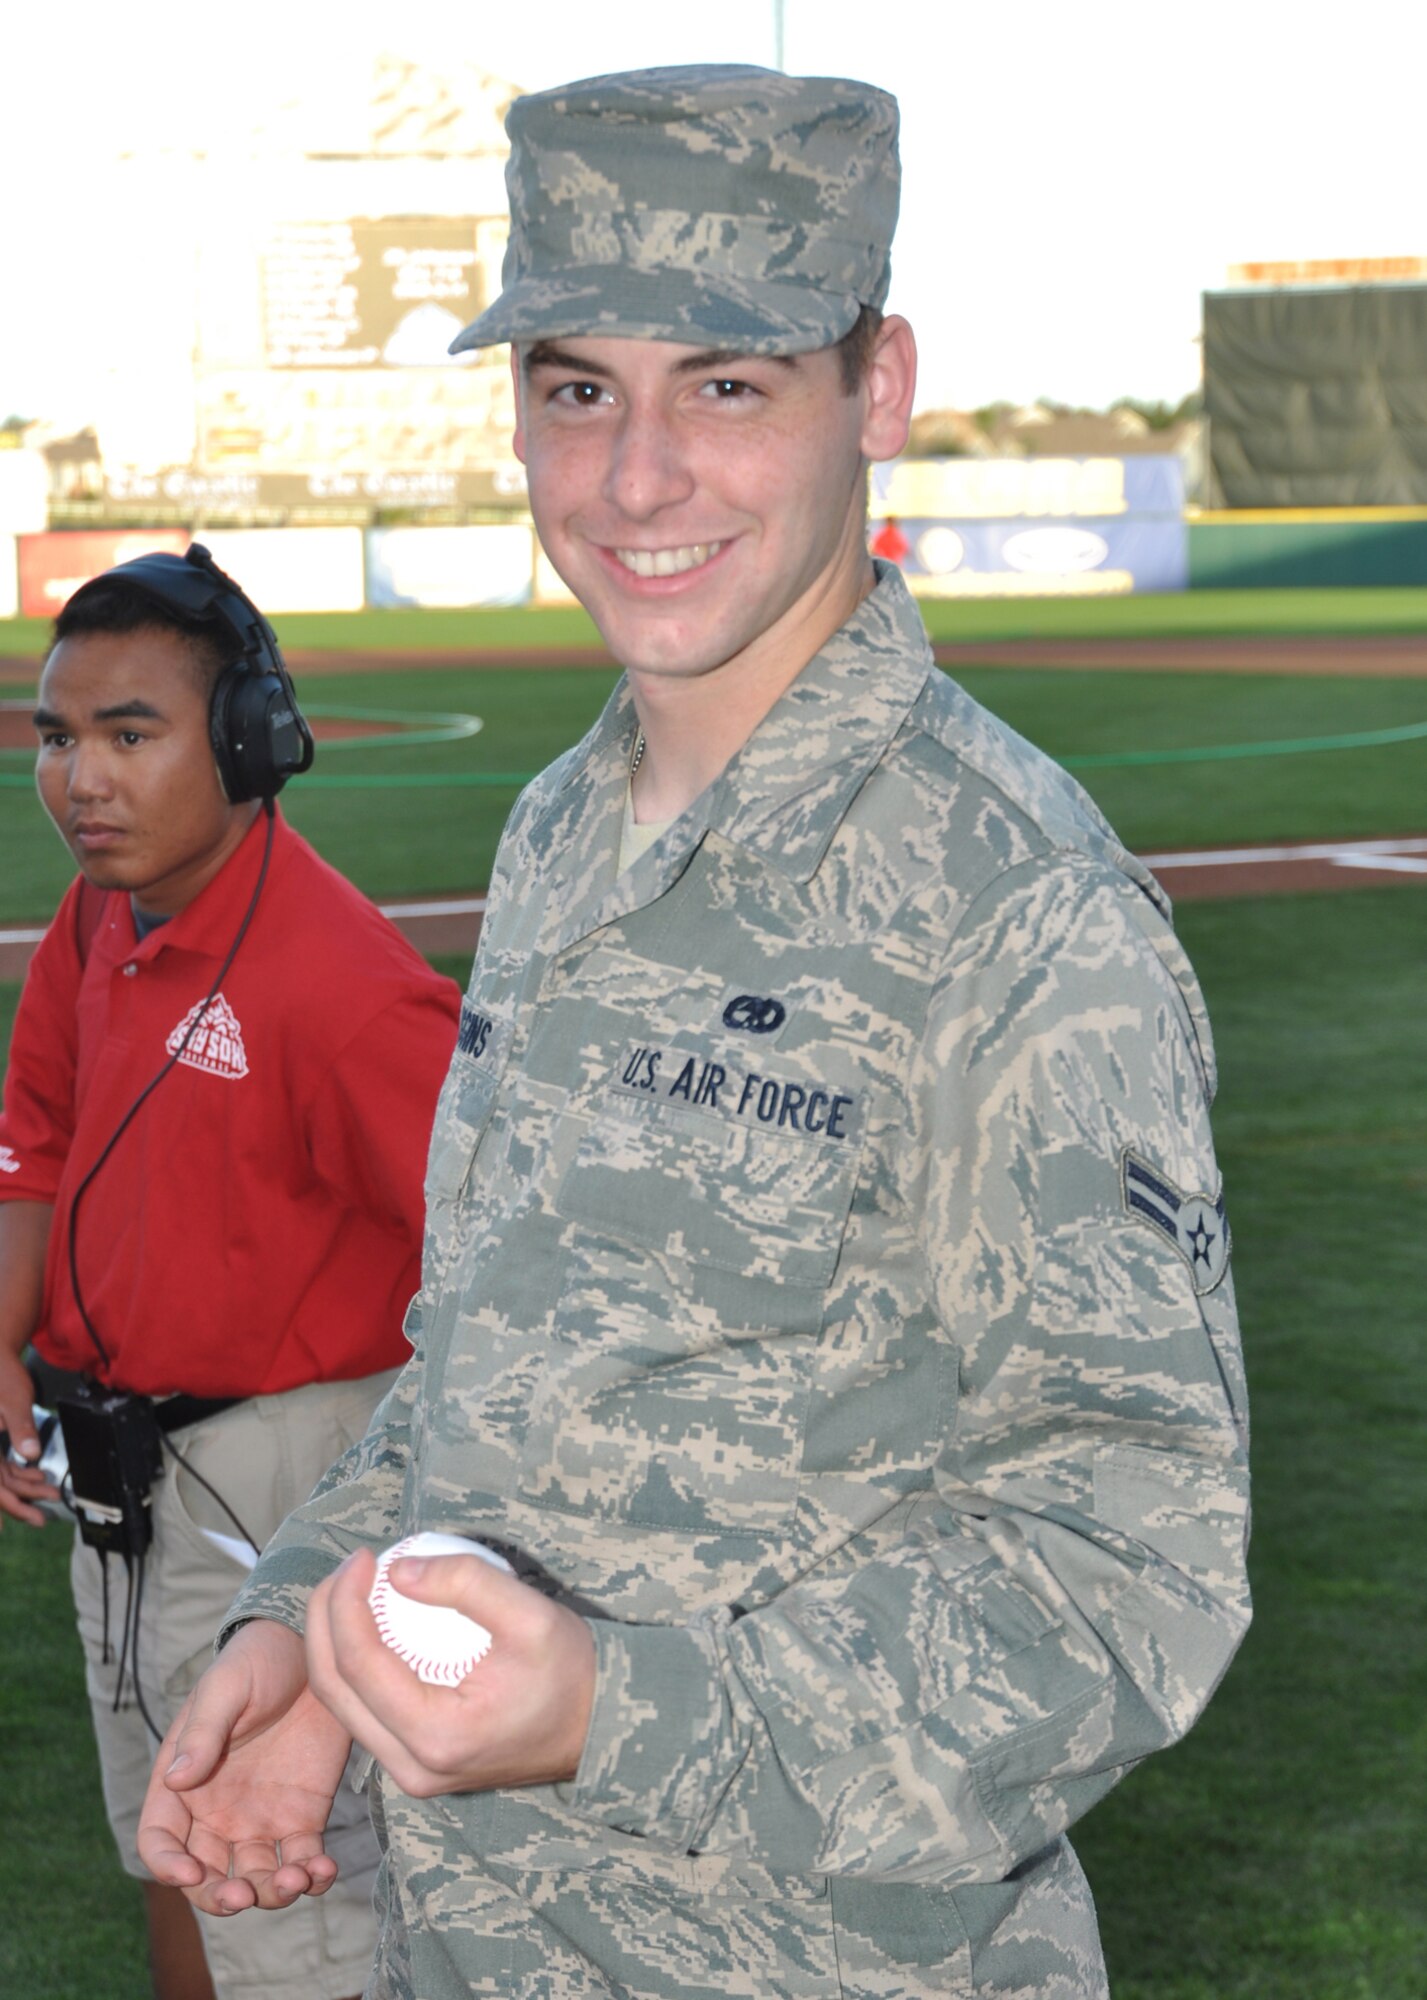 Airman 1st Class Tyler Higgins poses with his first-pitch baseball July 10 before throwing it out at Security Service Field in Colorado Springs, Colo. Airman Higgins, a C-130 avionics technician apprentice with the 52nd Airlift Squadron, was given the opportunity to throw out a first pitch at the Colorado Springs Sky Sox game because of his recent arrival to the squadron. The 52nd AS, an Active Duty C-130 organization, is associated with the Air Force Reserve's 302nd Airlift Wing. Both organizations are based at nearby Peterson Air Force Base. (U.S. Air Force photo/Staff Sgt. Stephen J. Collier)